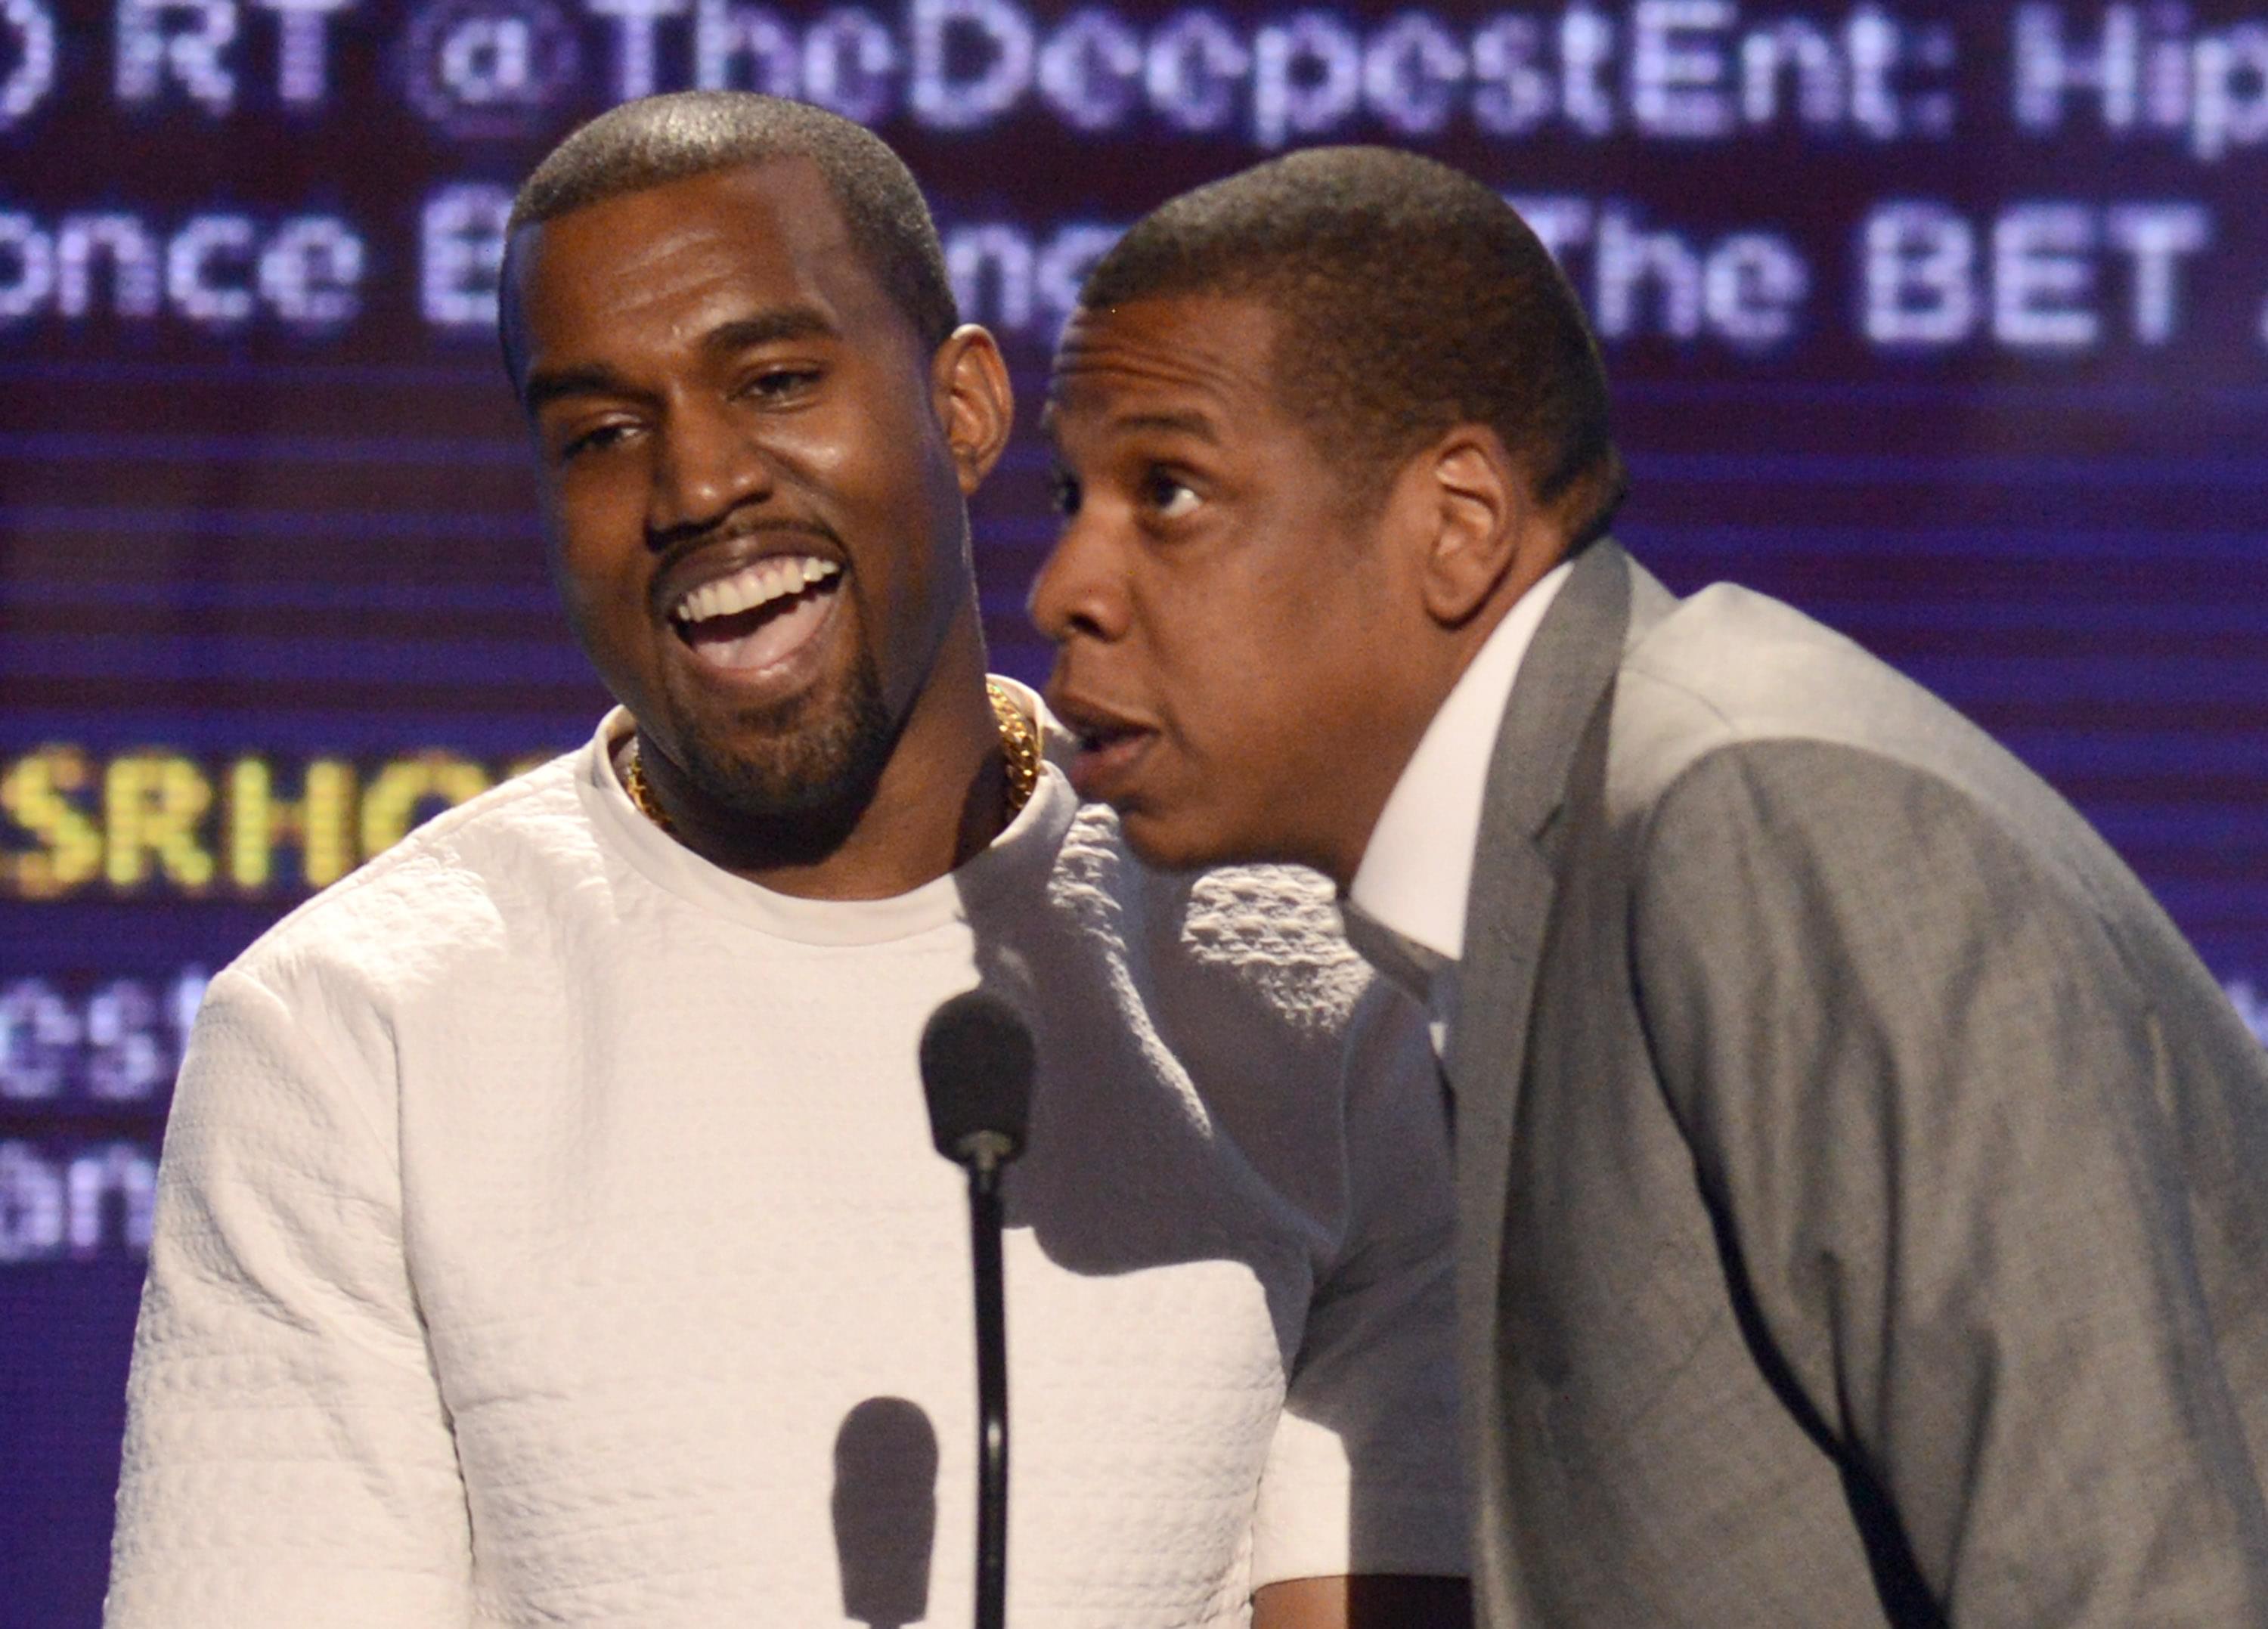 Jay-Z Disses Kanye West And His Trump Support On ‘Championships’